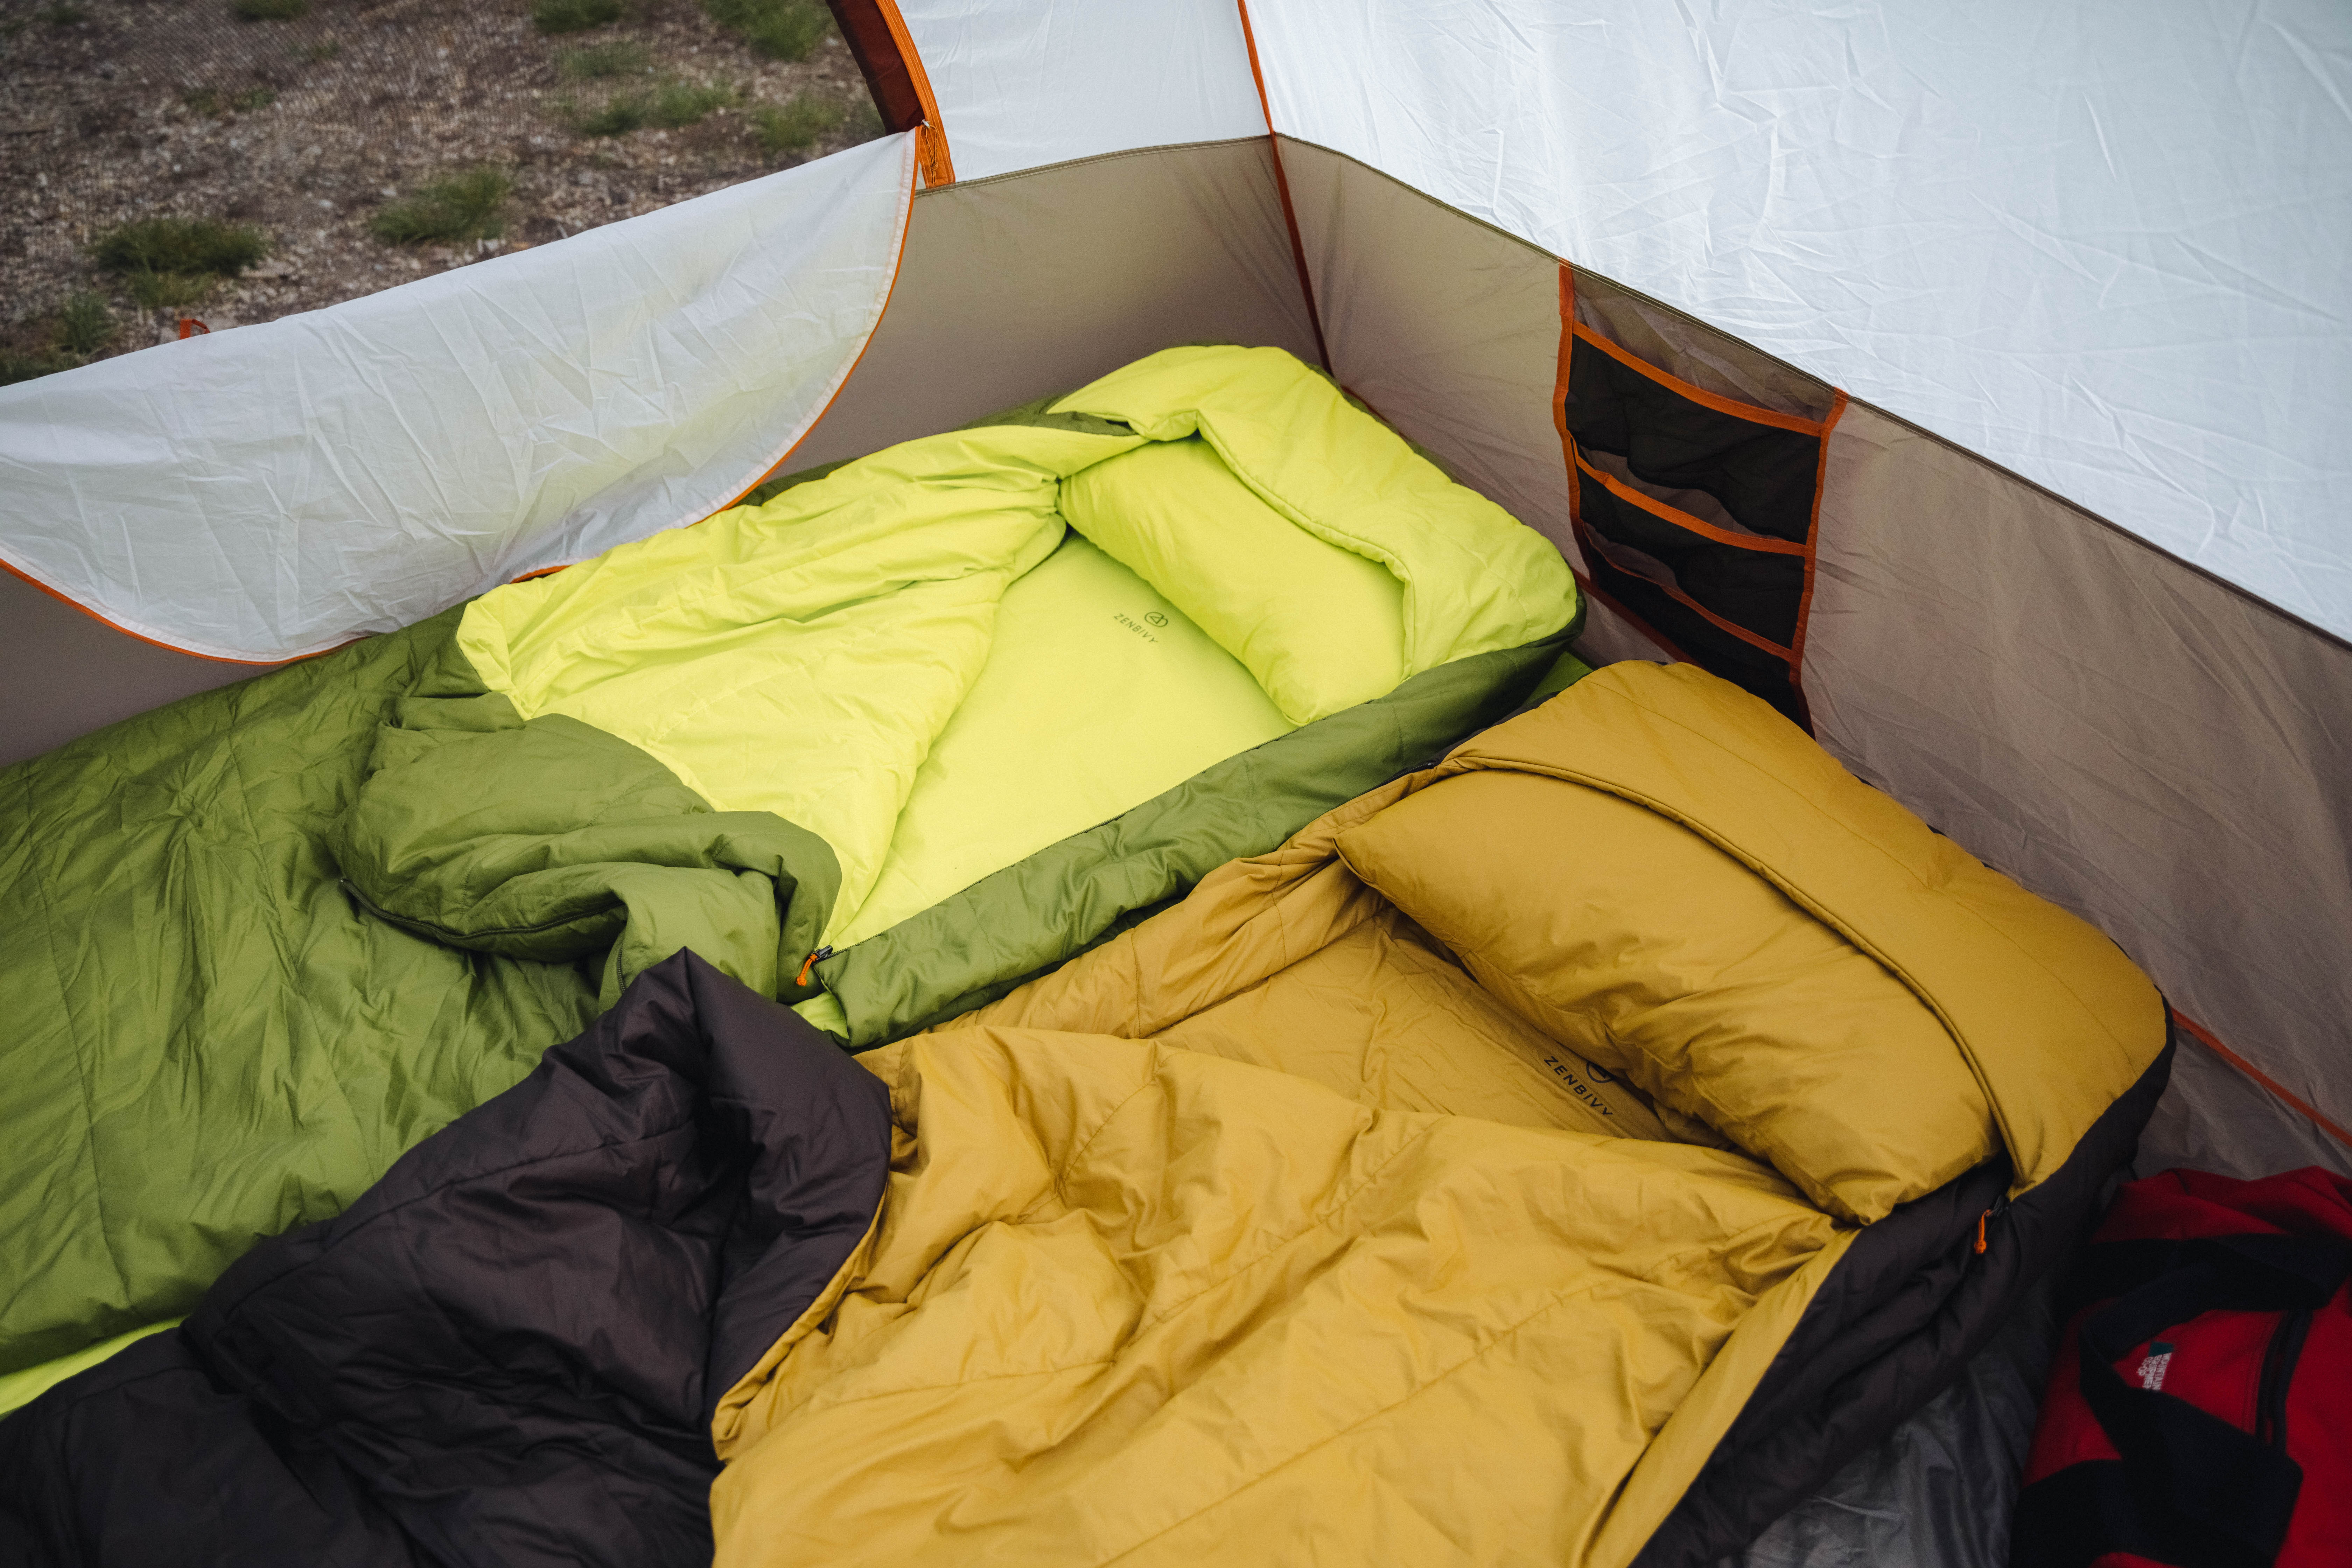 The Motobed, which is available in large (25 inches by 76 inches) and extra large (30 inches by 78 inches), features a 1.5 inch inflatable air mattress with a super comfortable foam mattress topper and a silky sheet bed. .